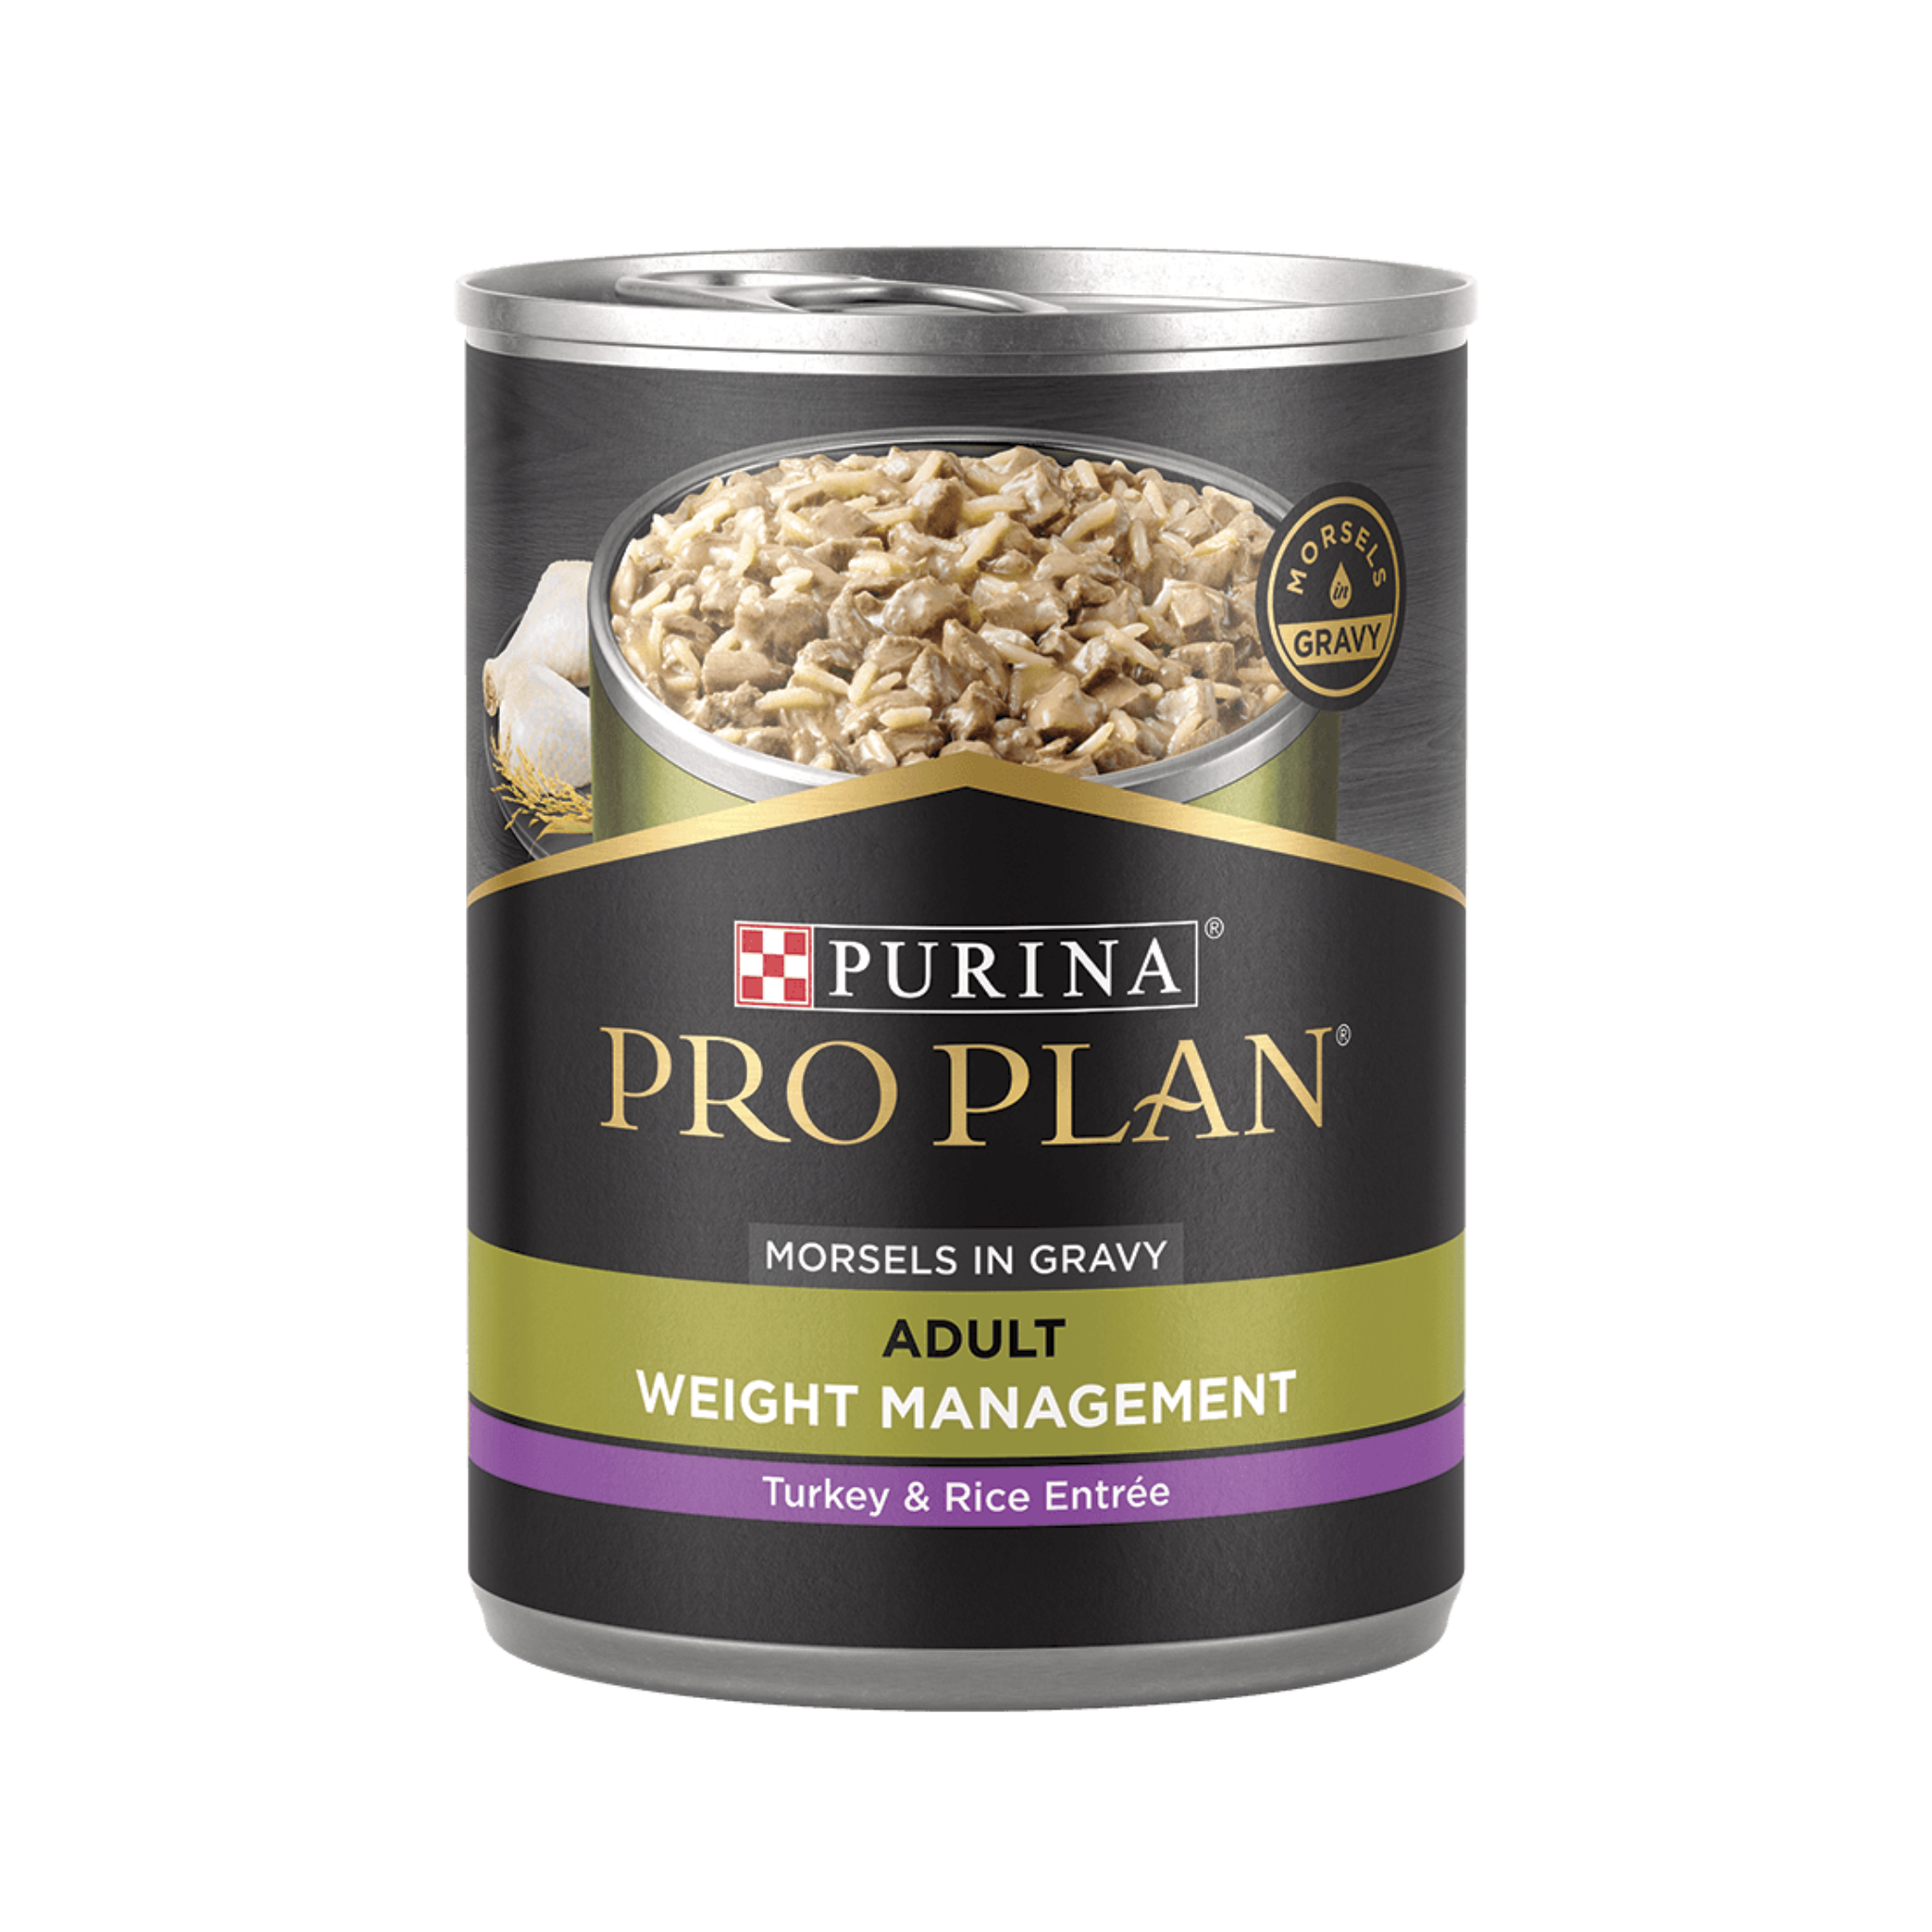 Pro Plan Turkey & Rice Weight Management Adult Dog Canned